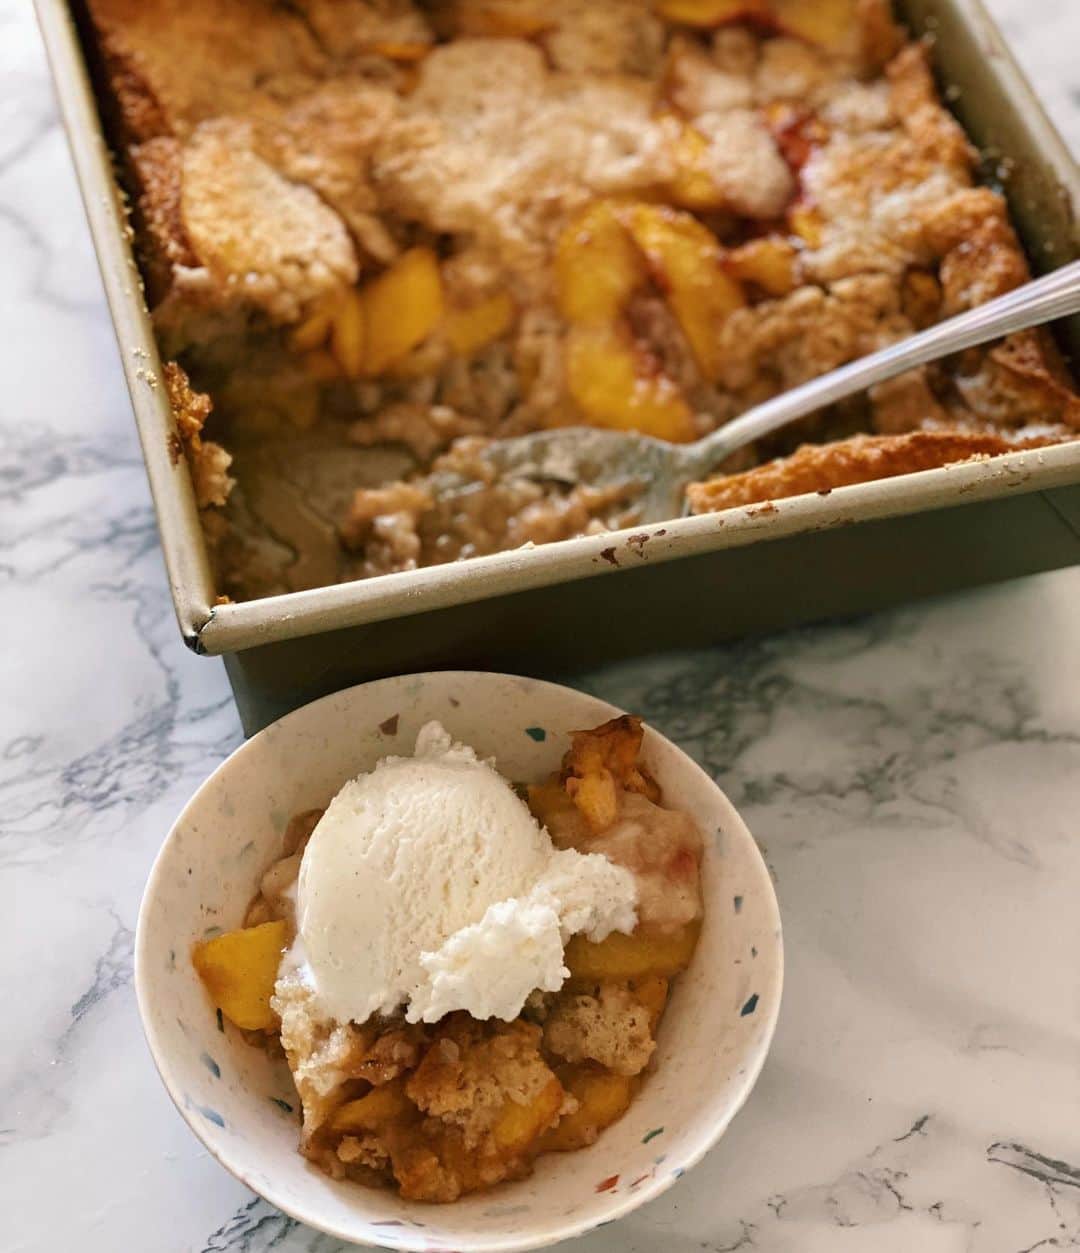 Antonietteのインスタグラム：「When you are stoned 🥴from eating  all the stone fruit this season! 🍑 🍒 Seriously can’t get enough of all the juicy fruit out there....eating it in salads, in cobbler,  crumble, crisps, on it’s’ own, etc. This is Texas Peach Cobbler, recipe courtesy of @davidlebovitz . Such a simple and satisfying summer treat, that showcases peaches in all its’ glory! Buttery, sweet and super peachy, and topped with ice cream that I’ve shown in my highlights. Please summer don’t end! Not ready for pears, apples and persimmons just yet! 😒 🍎 🍏 🍐 #summertime」